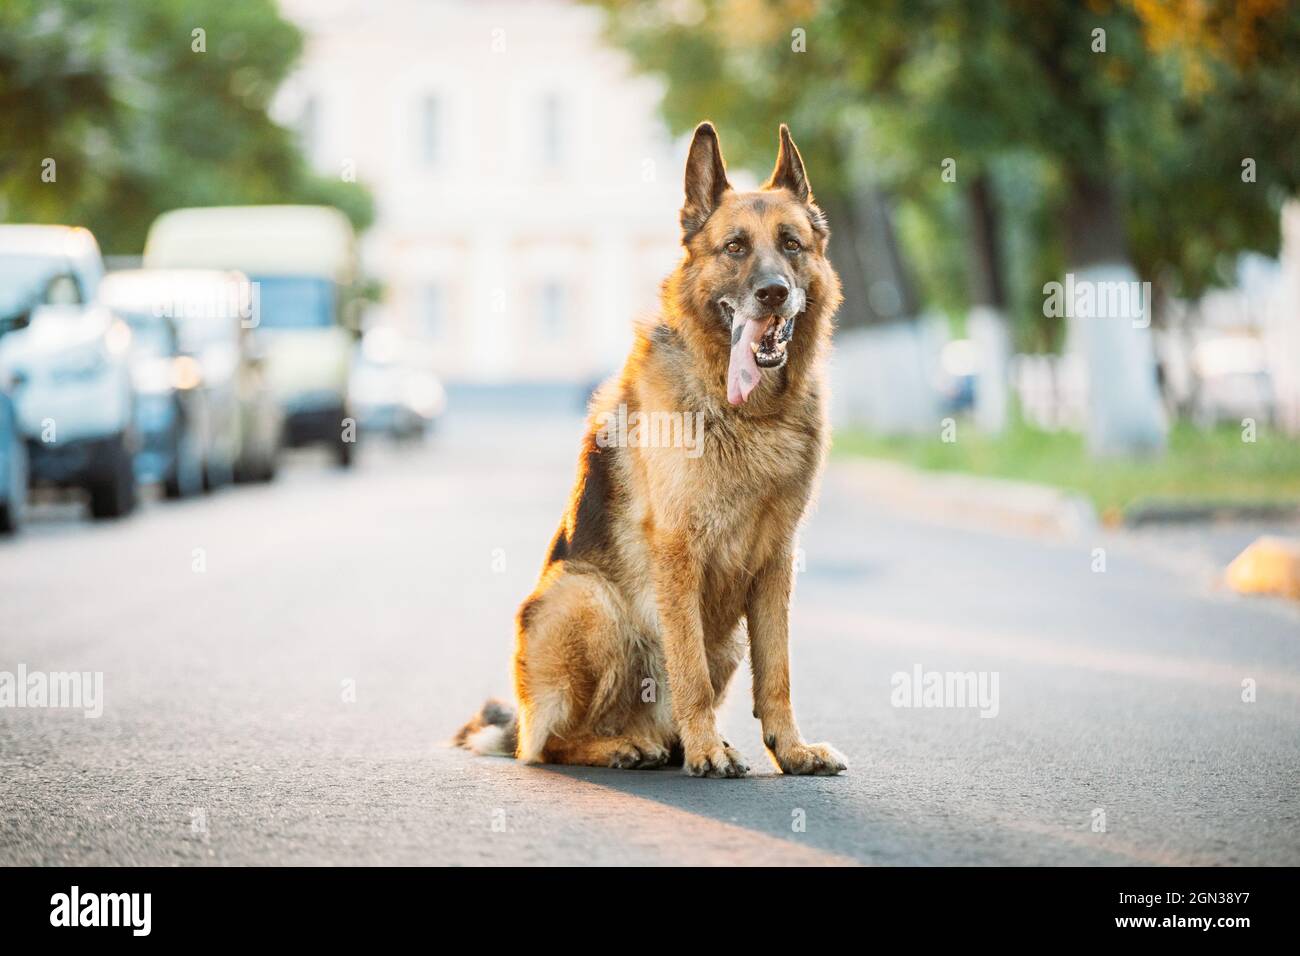 Alsatian Wolf Dog Sitting On Road. Brown German Shepherd Dog Sitting On Road In Sunny Summer Day Stock Photo